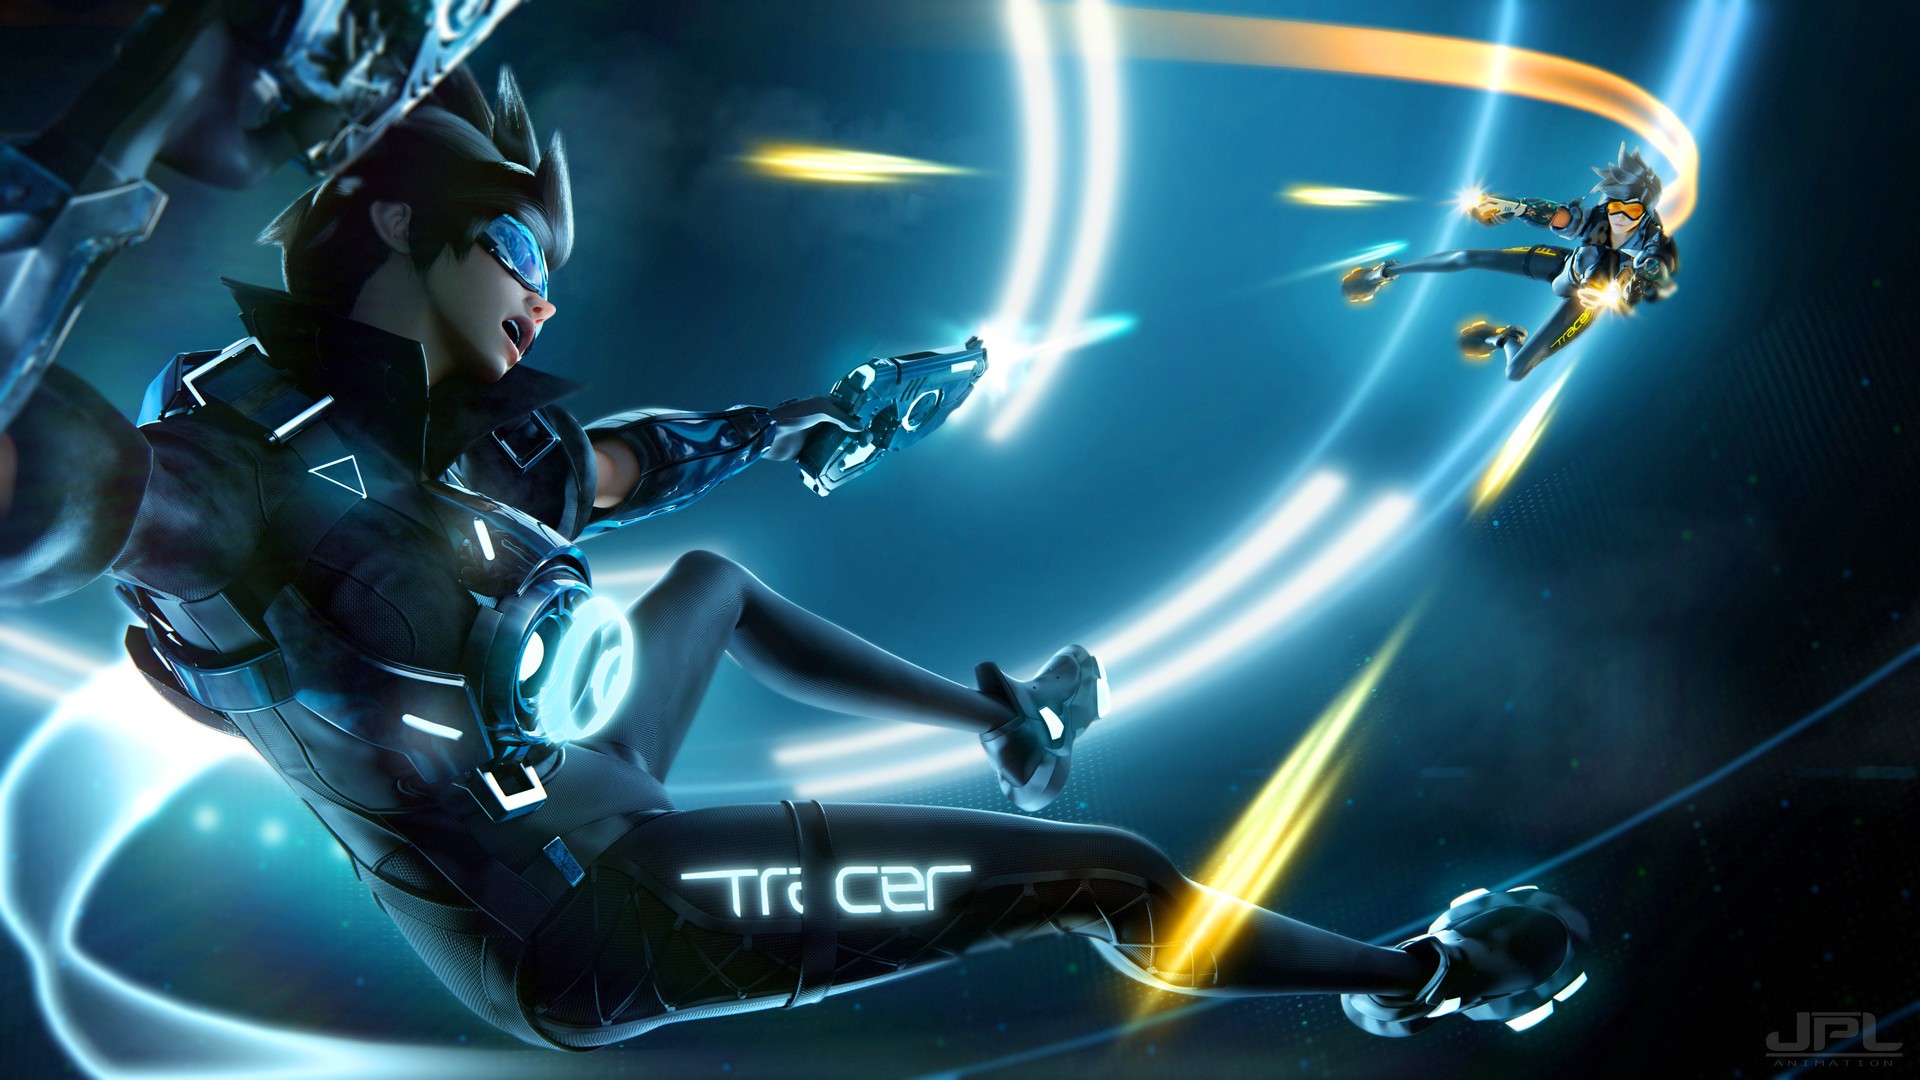 Wallpaper Tracer of overwatch game